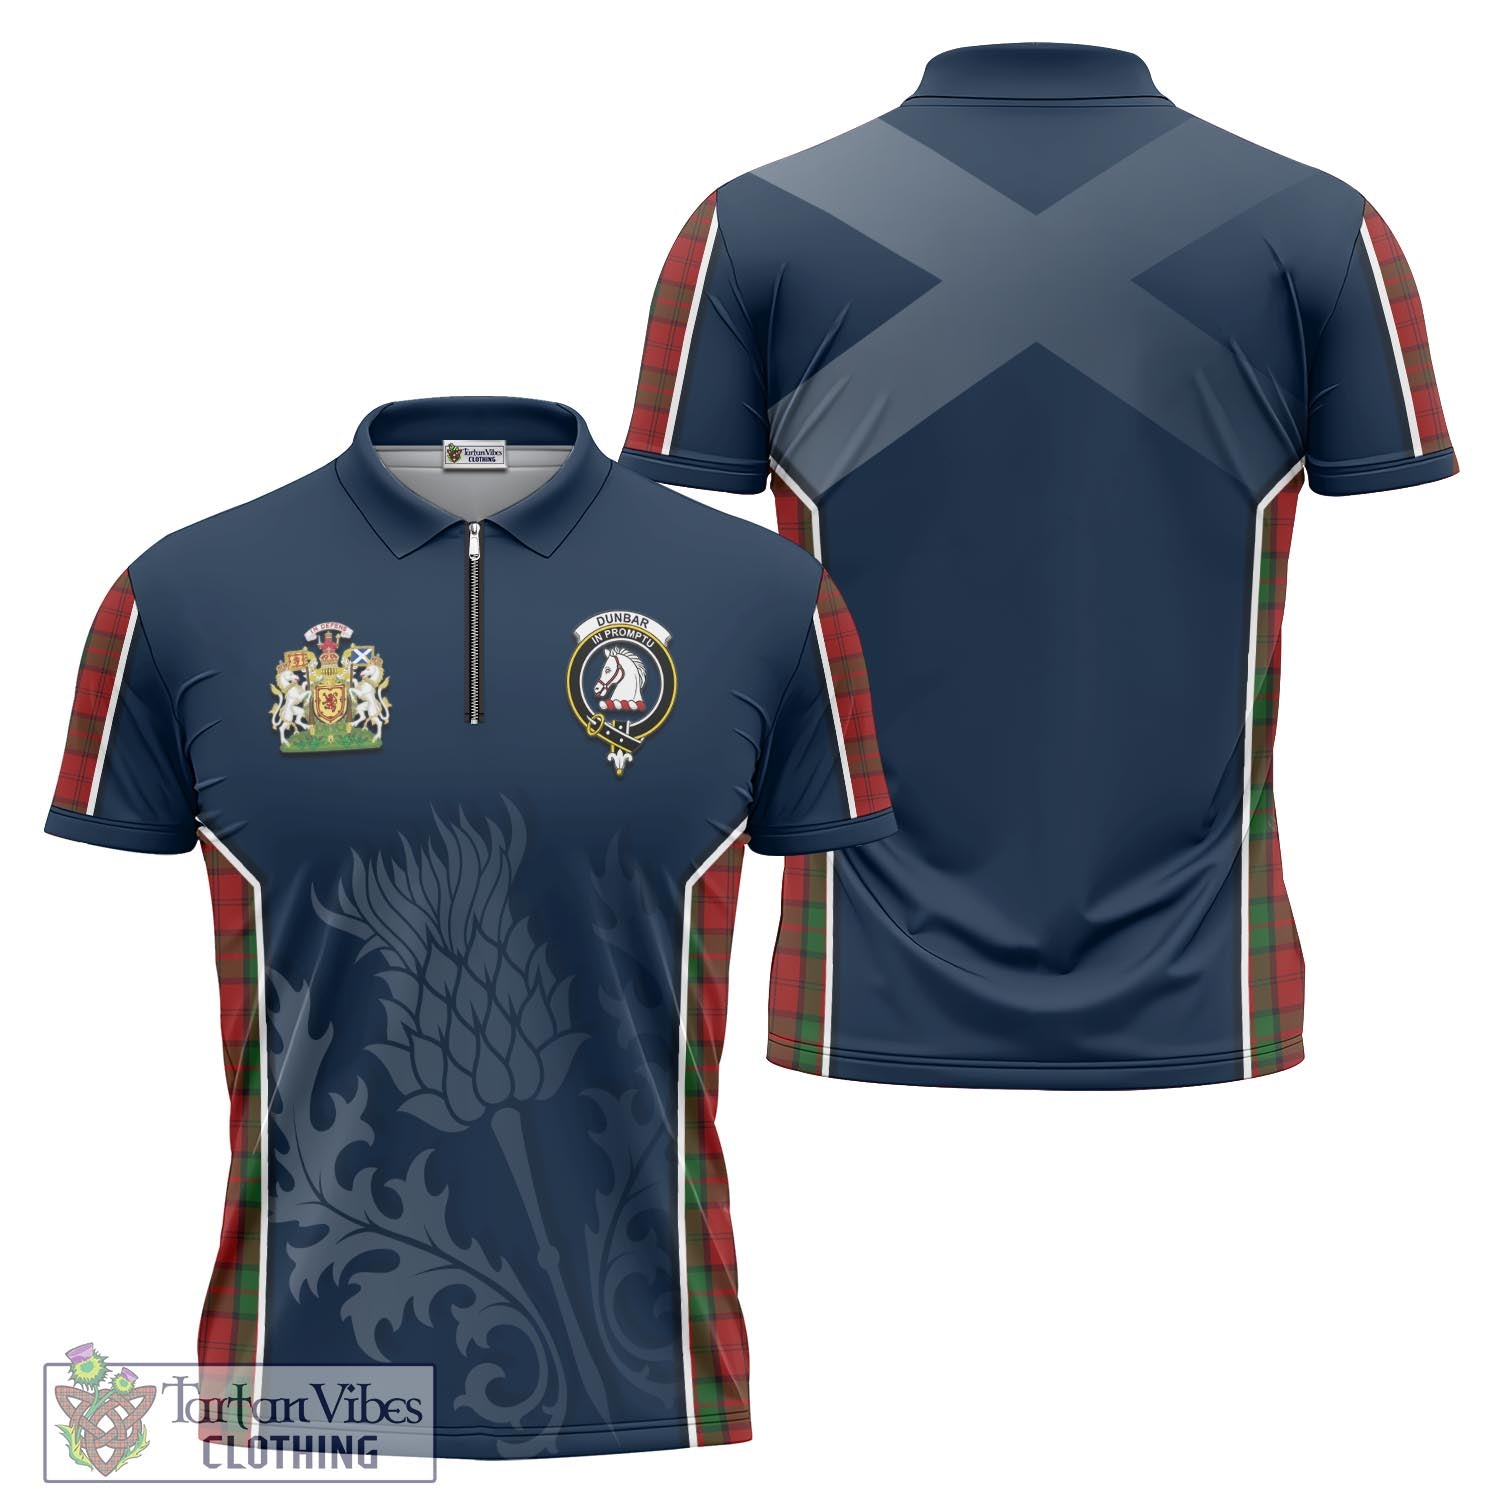 Tartan Vibes Clothing Dunbar Tartan Zipper Polo Shirt with Family Crest and Scottish Thistle Vibes Sport Style